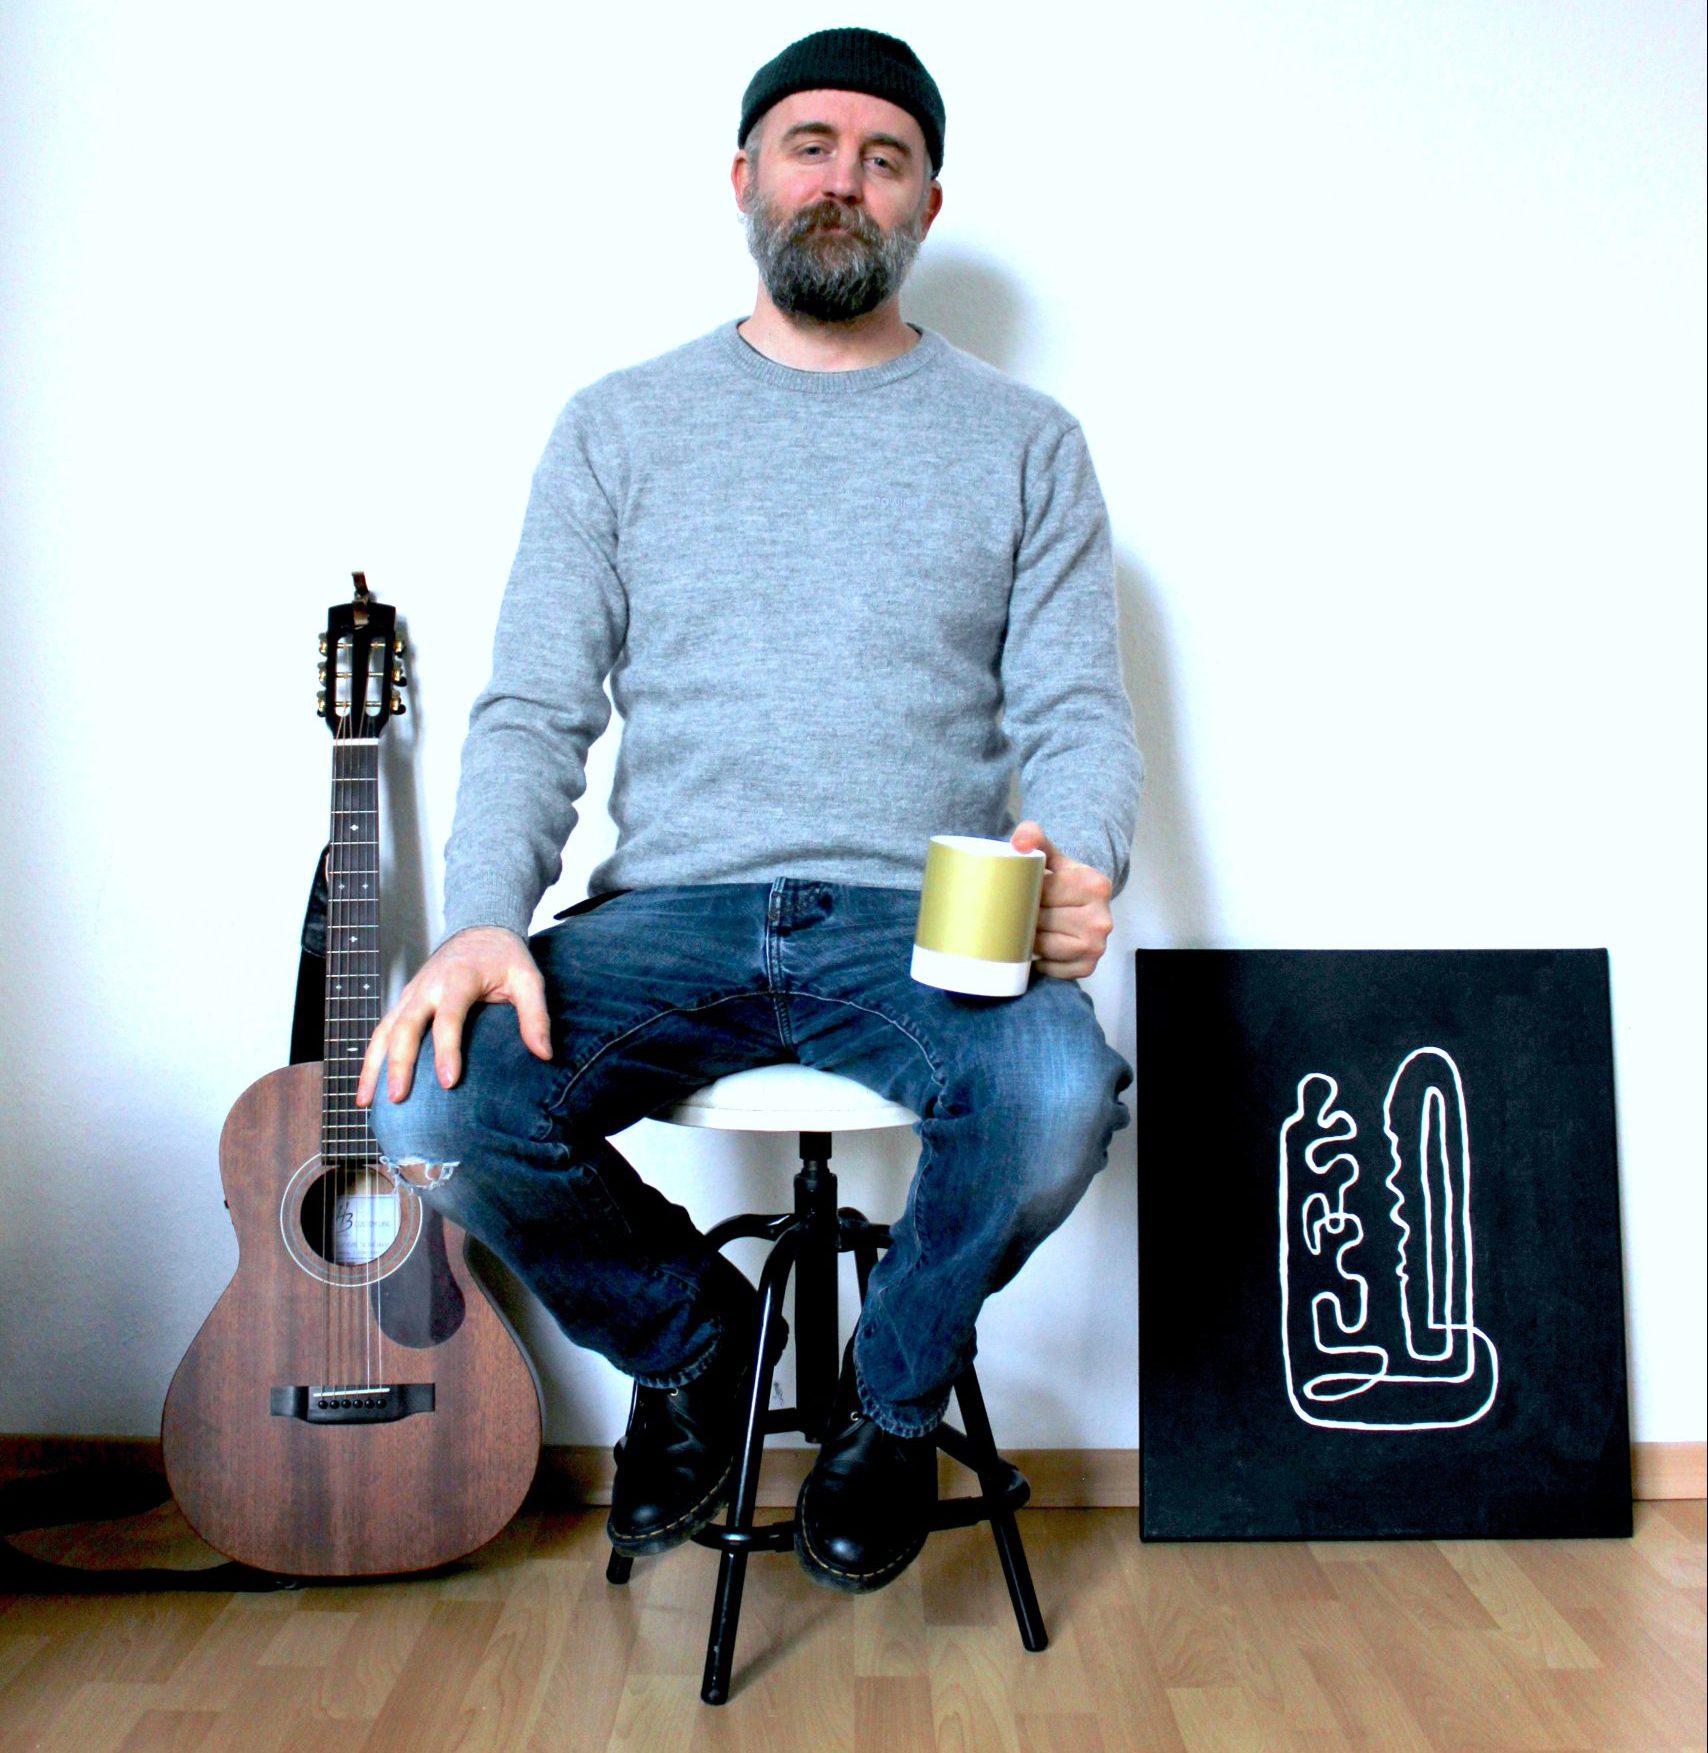 Portrait of Sammy H. Stephens, photo of a musician sitting in a chair holding a cup of coffee with a guitar nearby